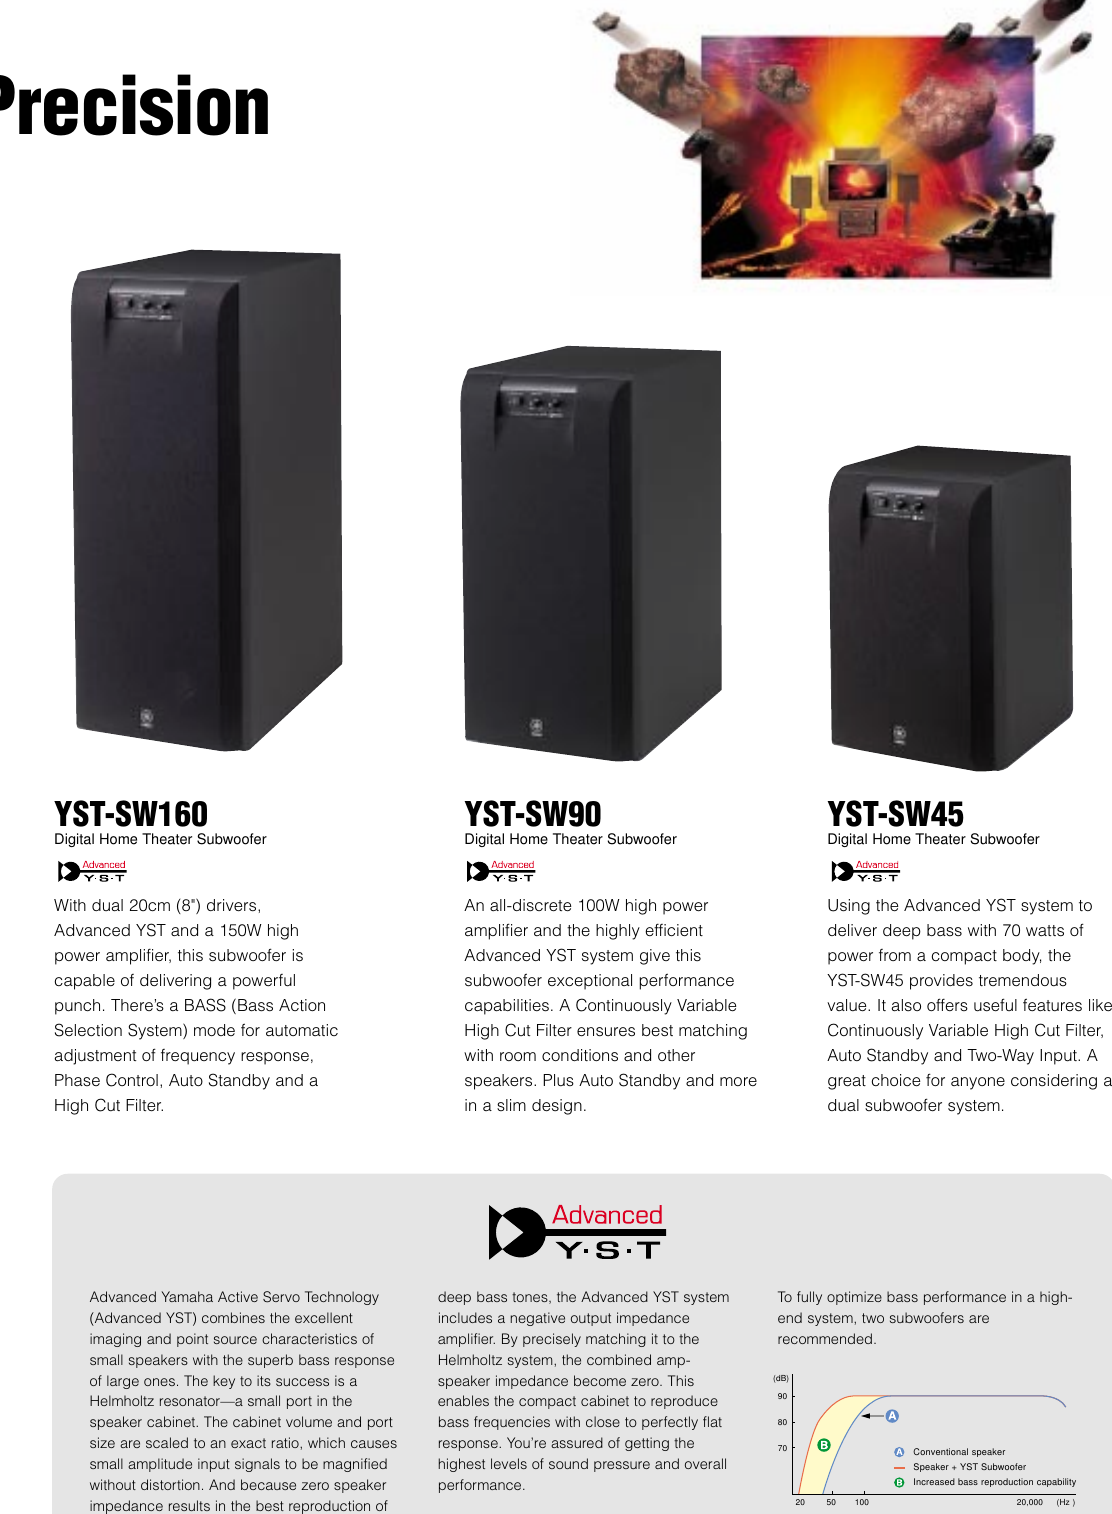 Page 7 of 8 - Yamaha Speaker-System-Advanced-Yst-And-Qd-Bass-Subwoofers-Users-Manual YST-SW800/320 Cat.(U/C)  Yamaha-speaker-system-advanced-yst-and-qd-bass-subwoofers-users-manual